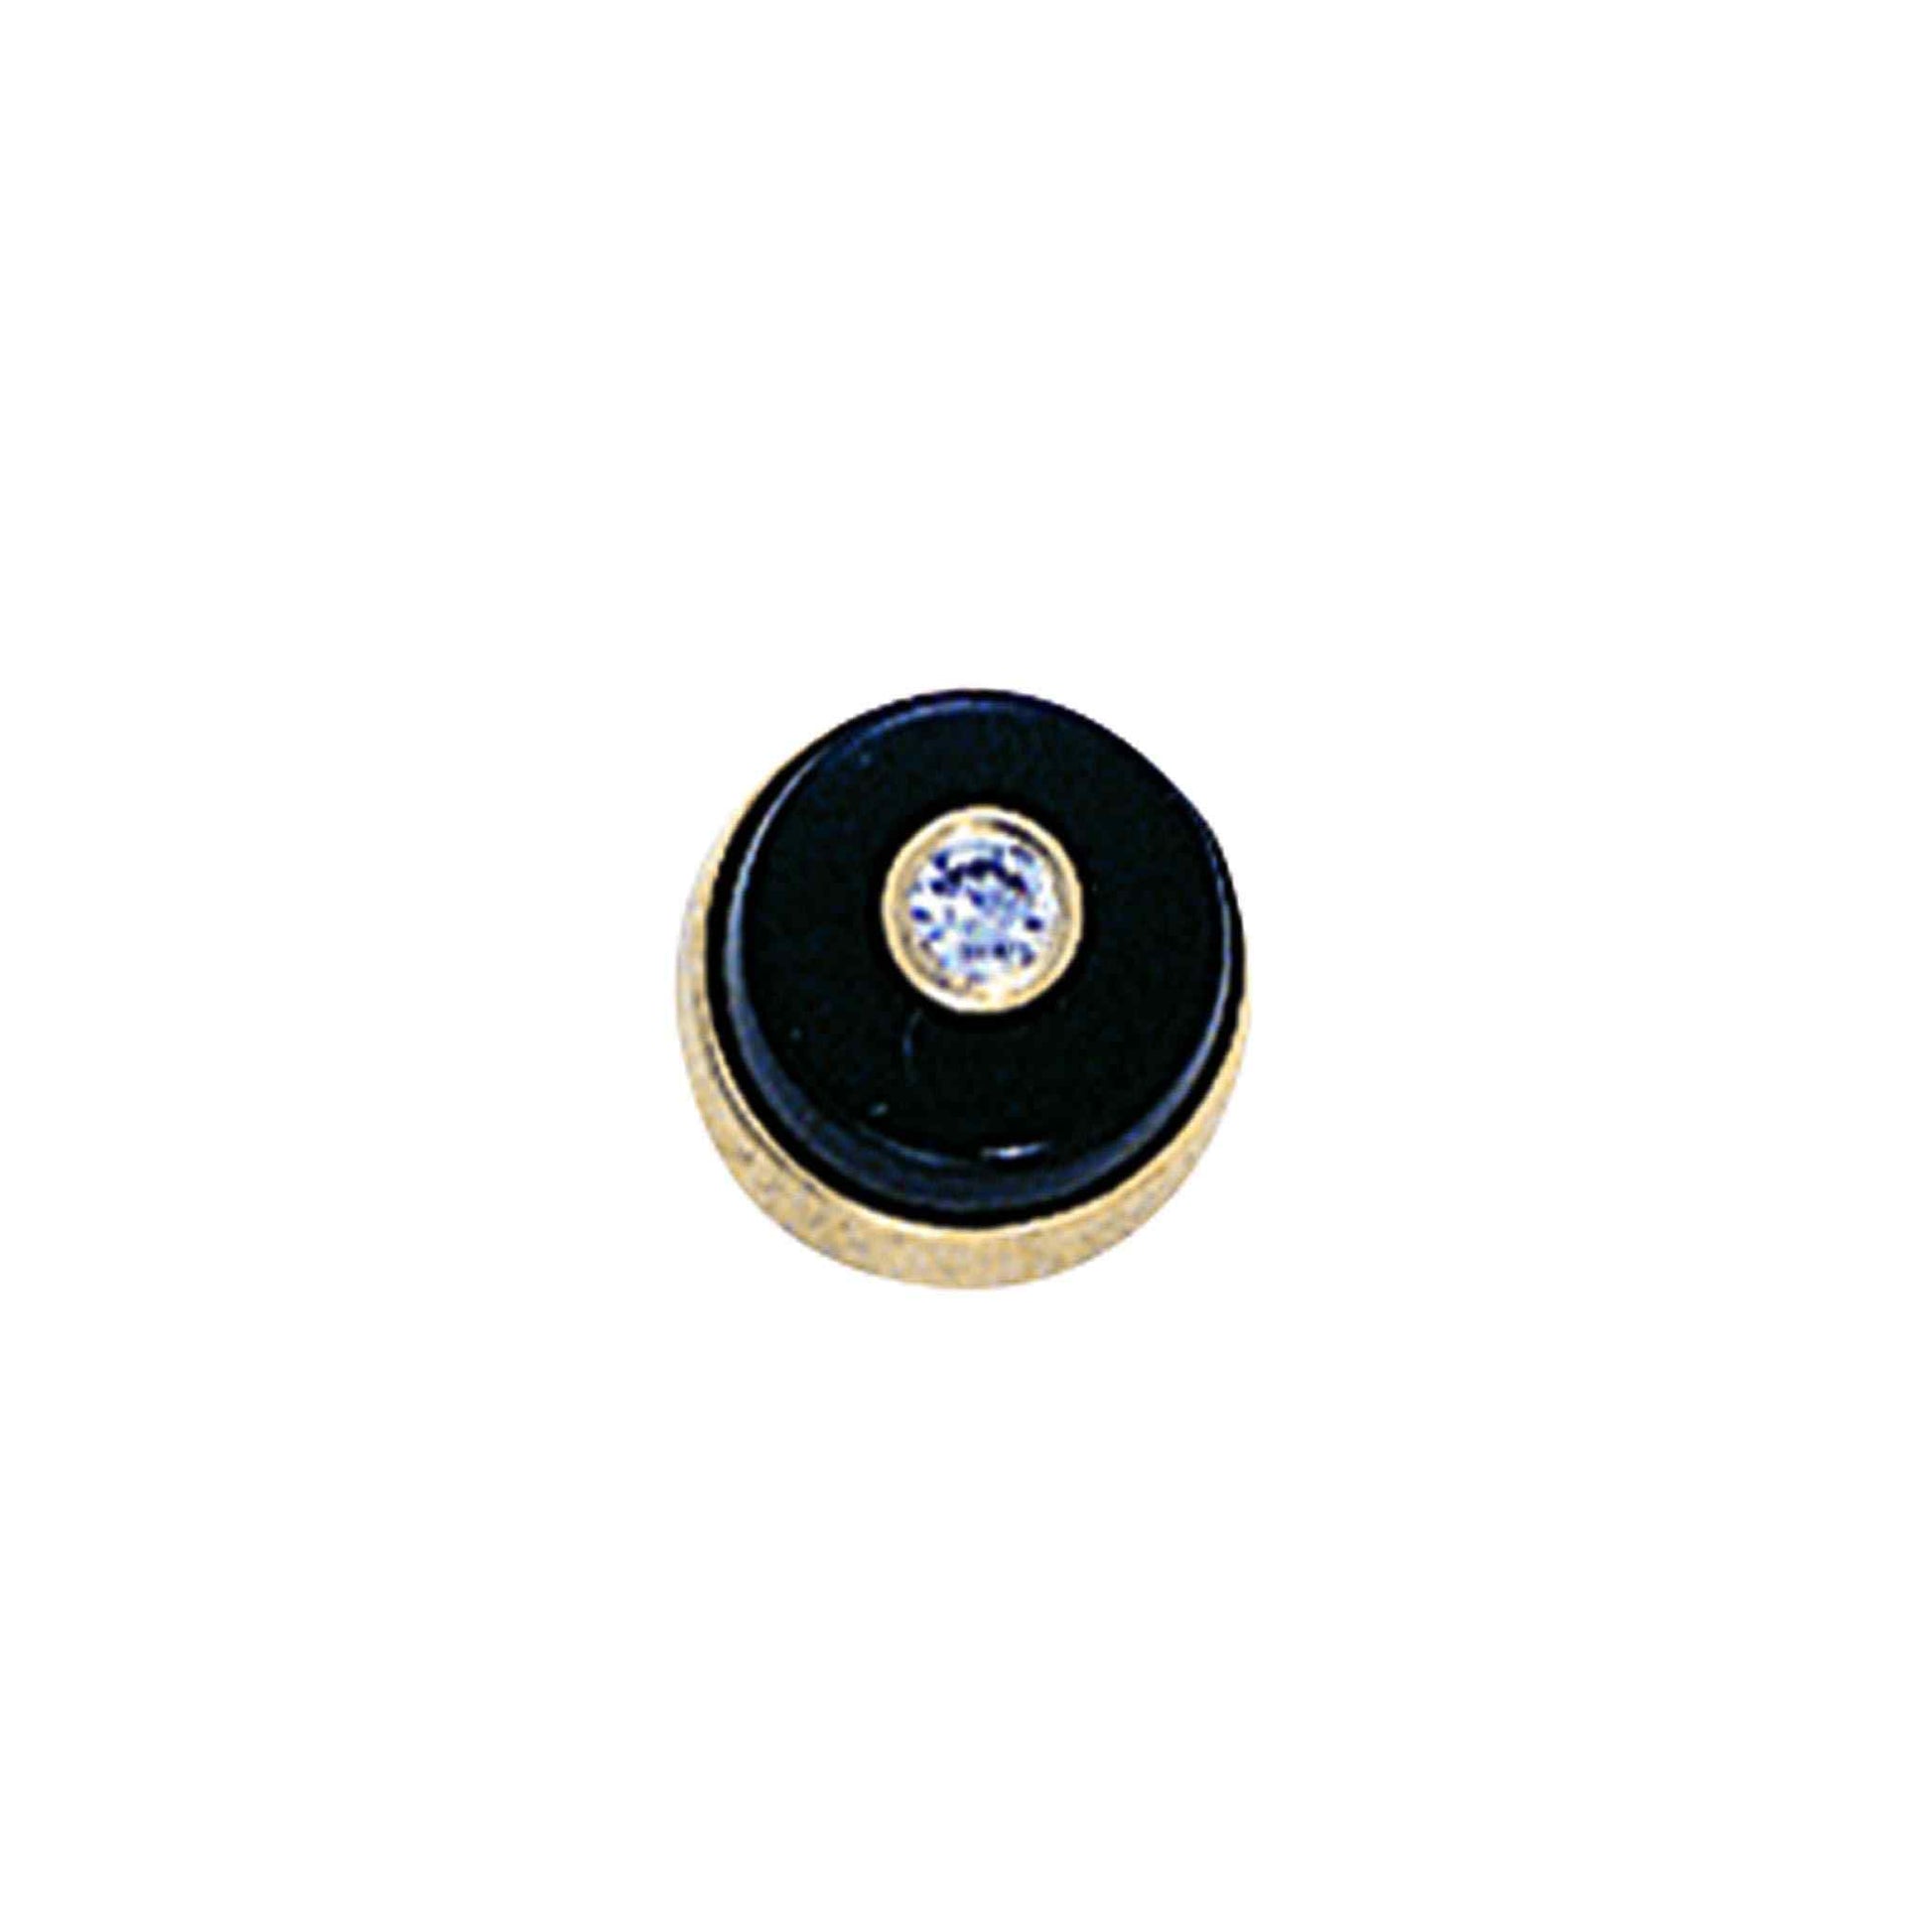 A 14k yellow gold onyx & diamond tie tack with .04ctw diamonds displayed on a neutral white background.